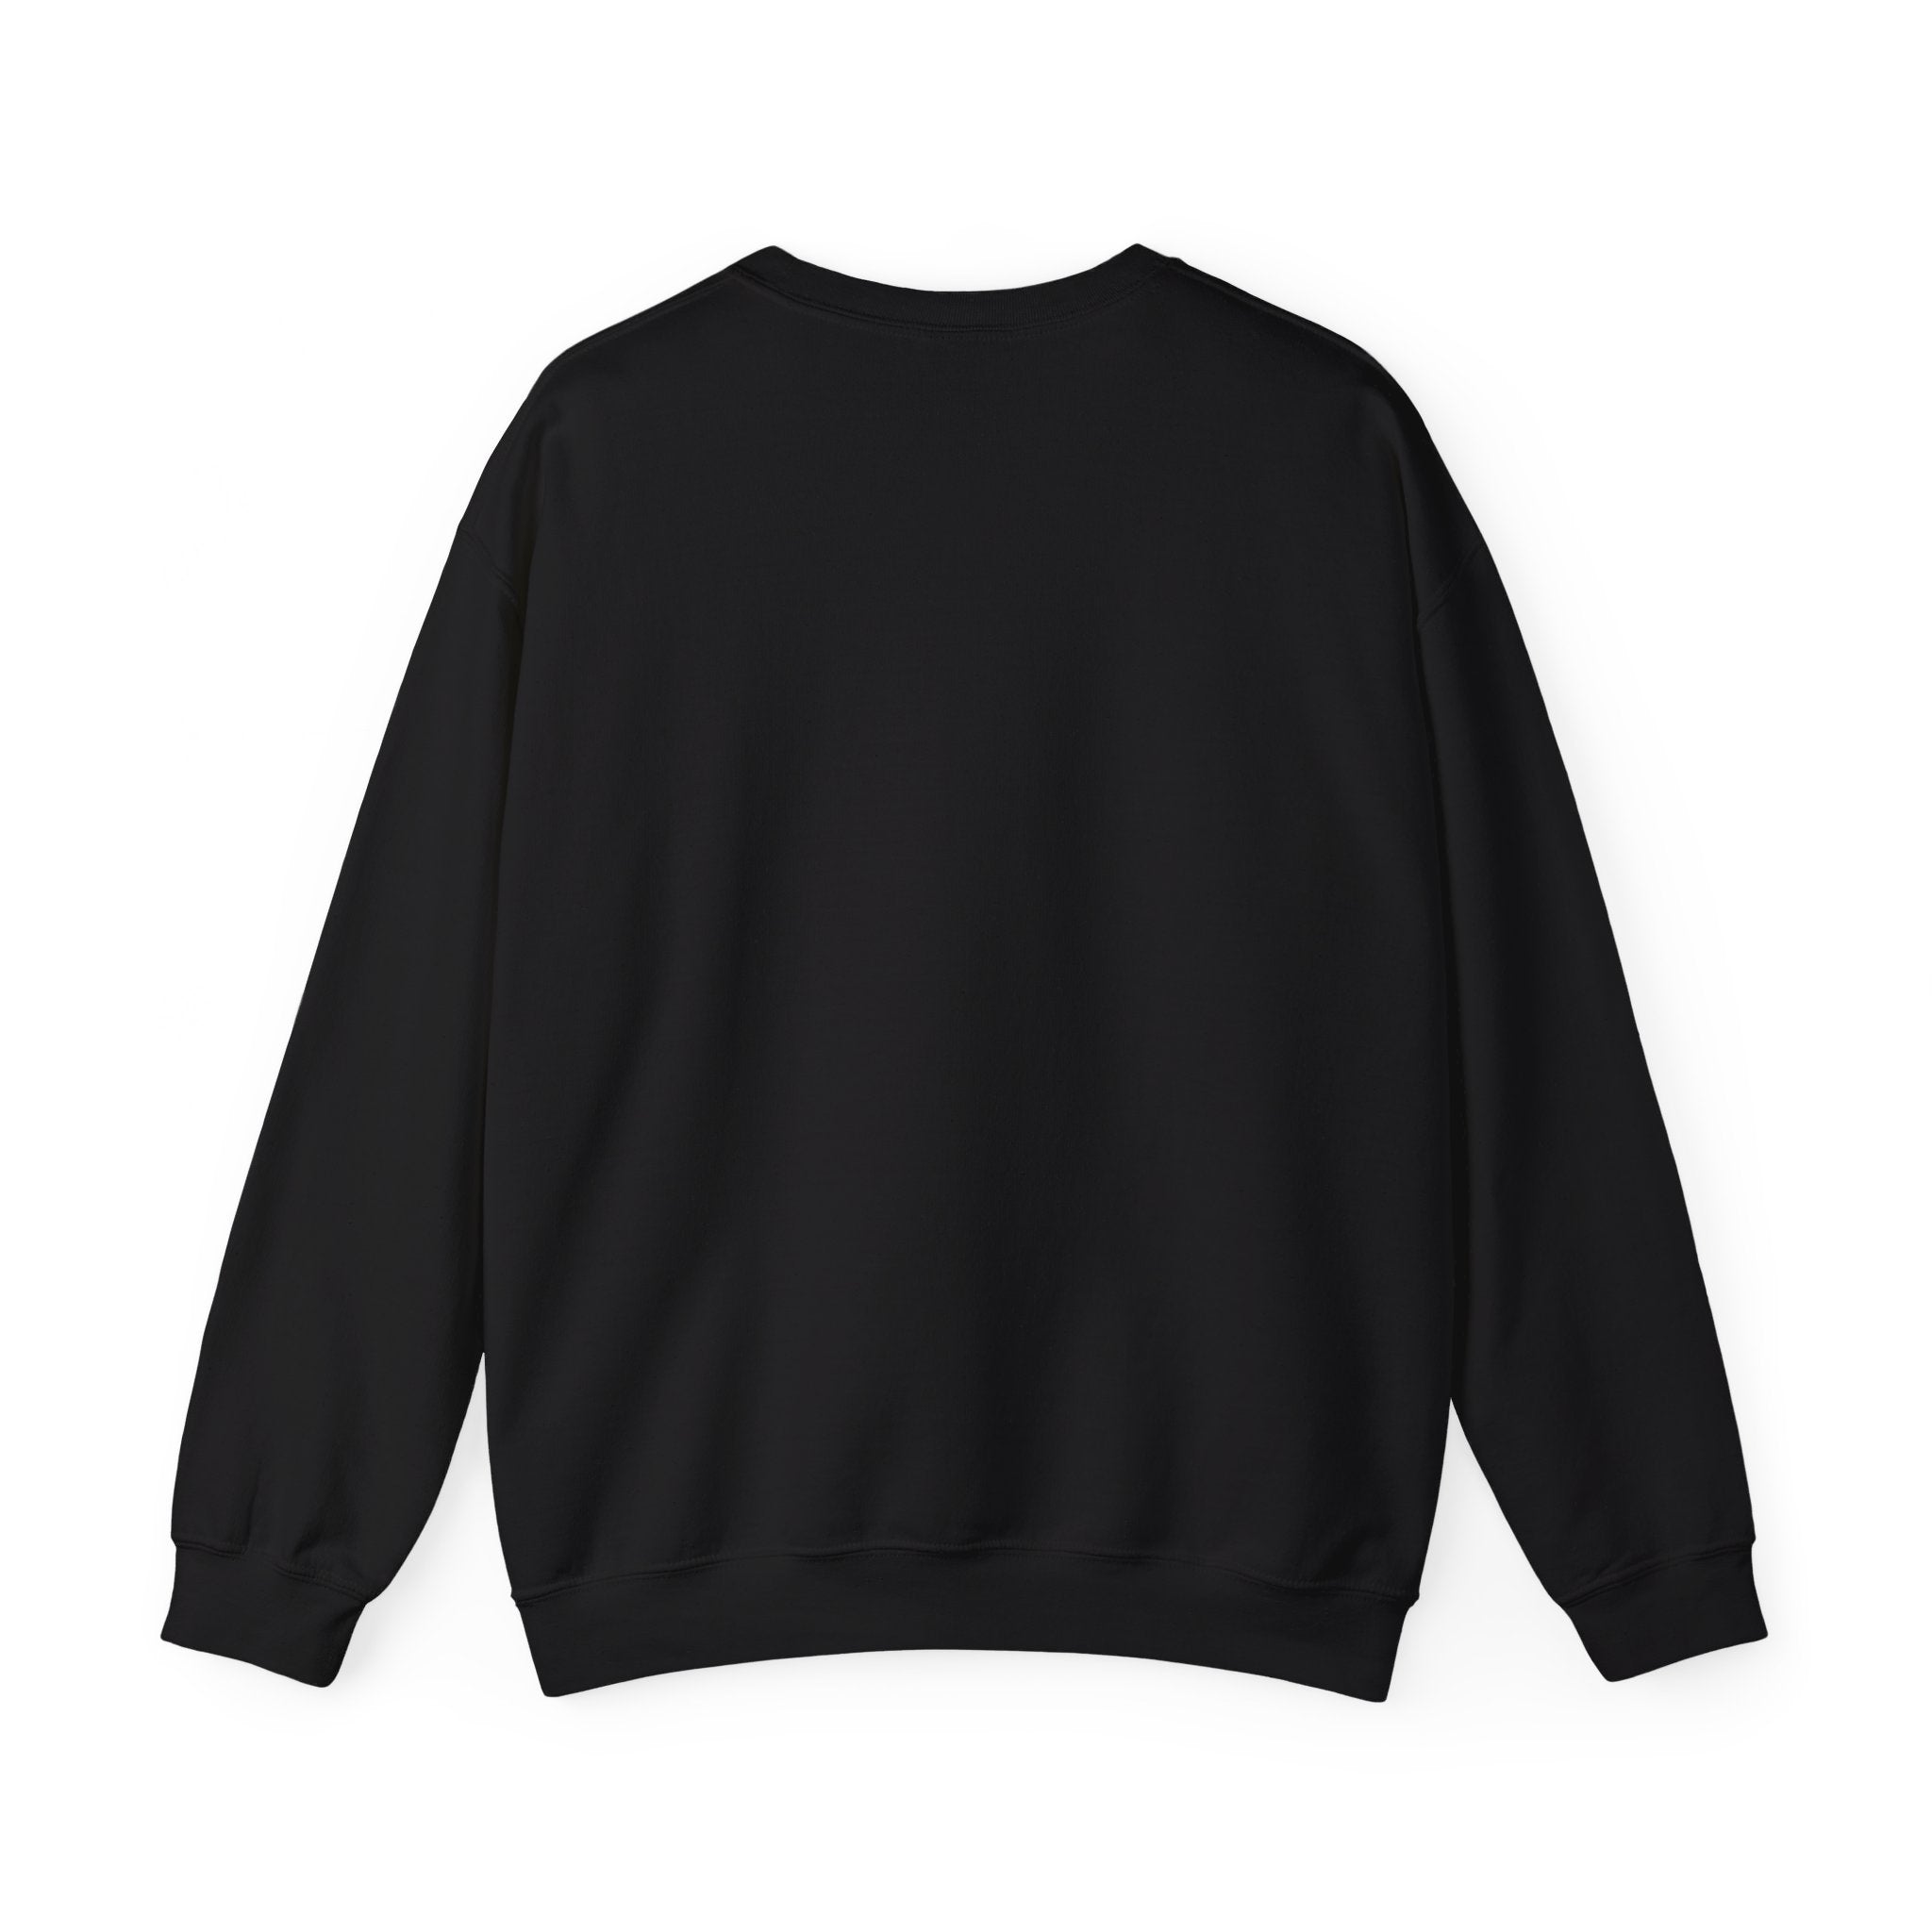 A plain black RG-B - Sweatshirt viewed from the back, perfect for comfort lovers.